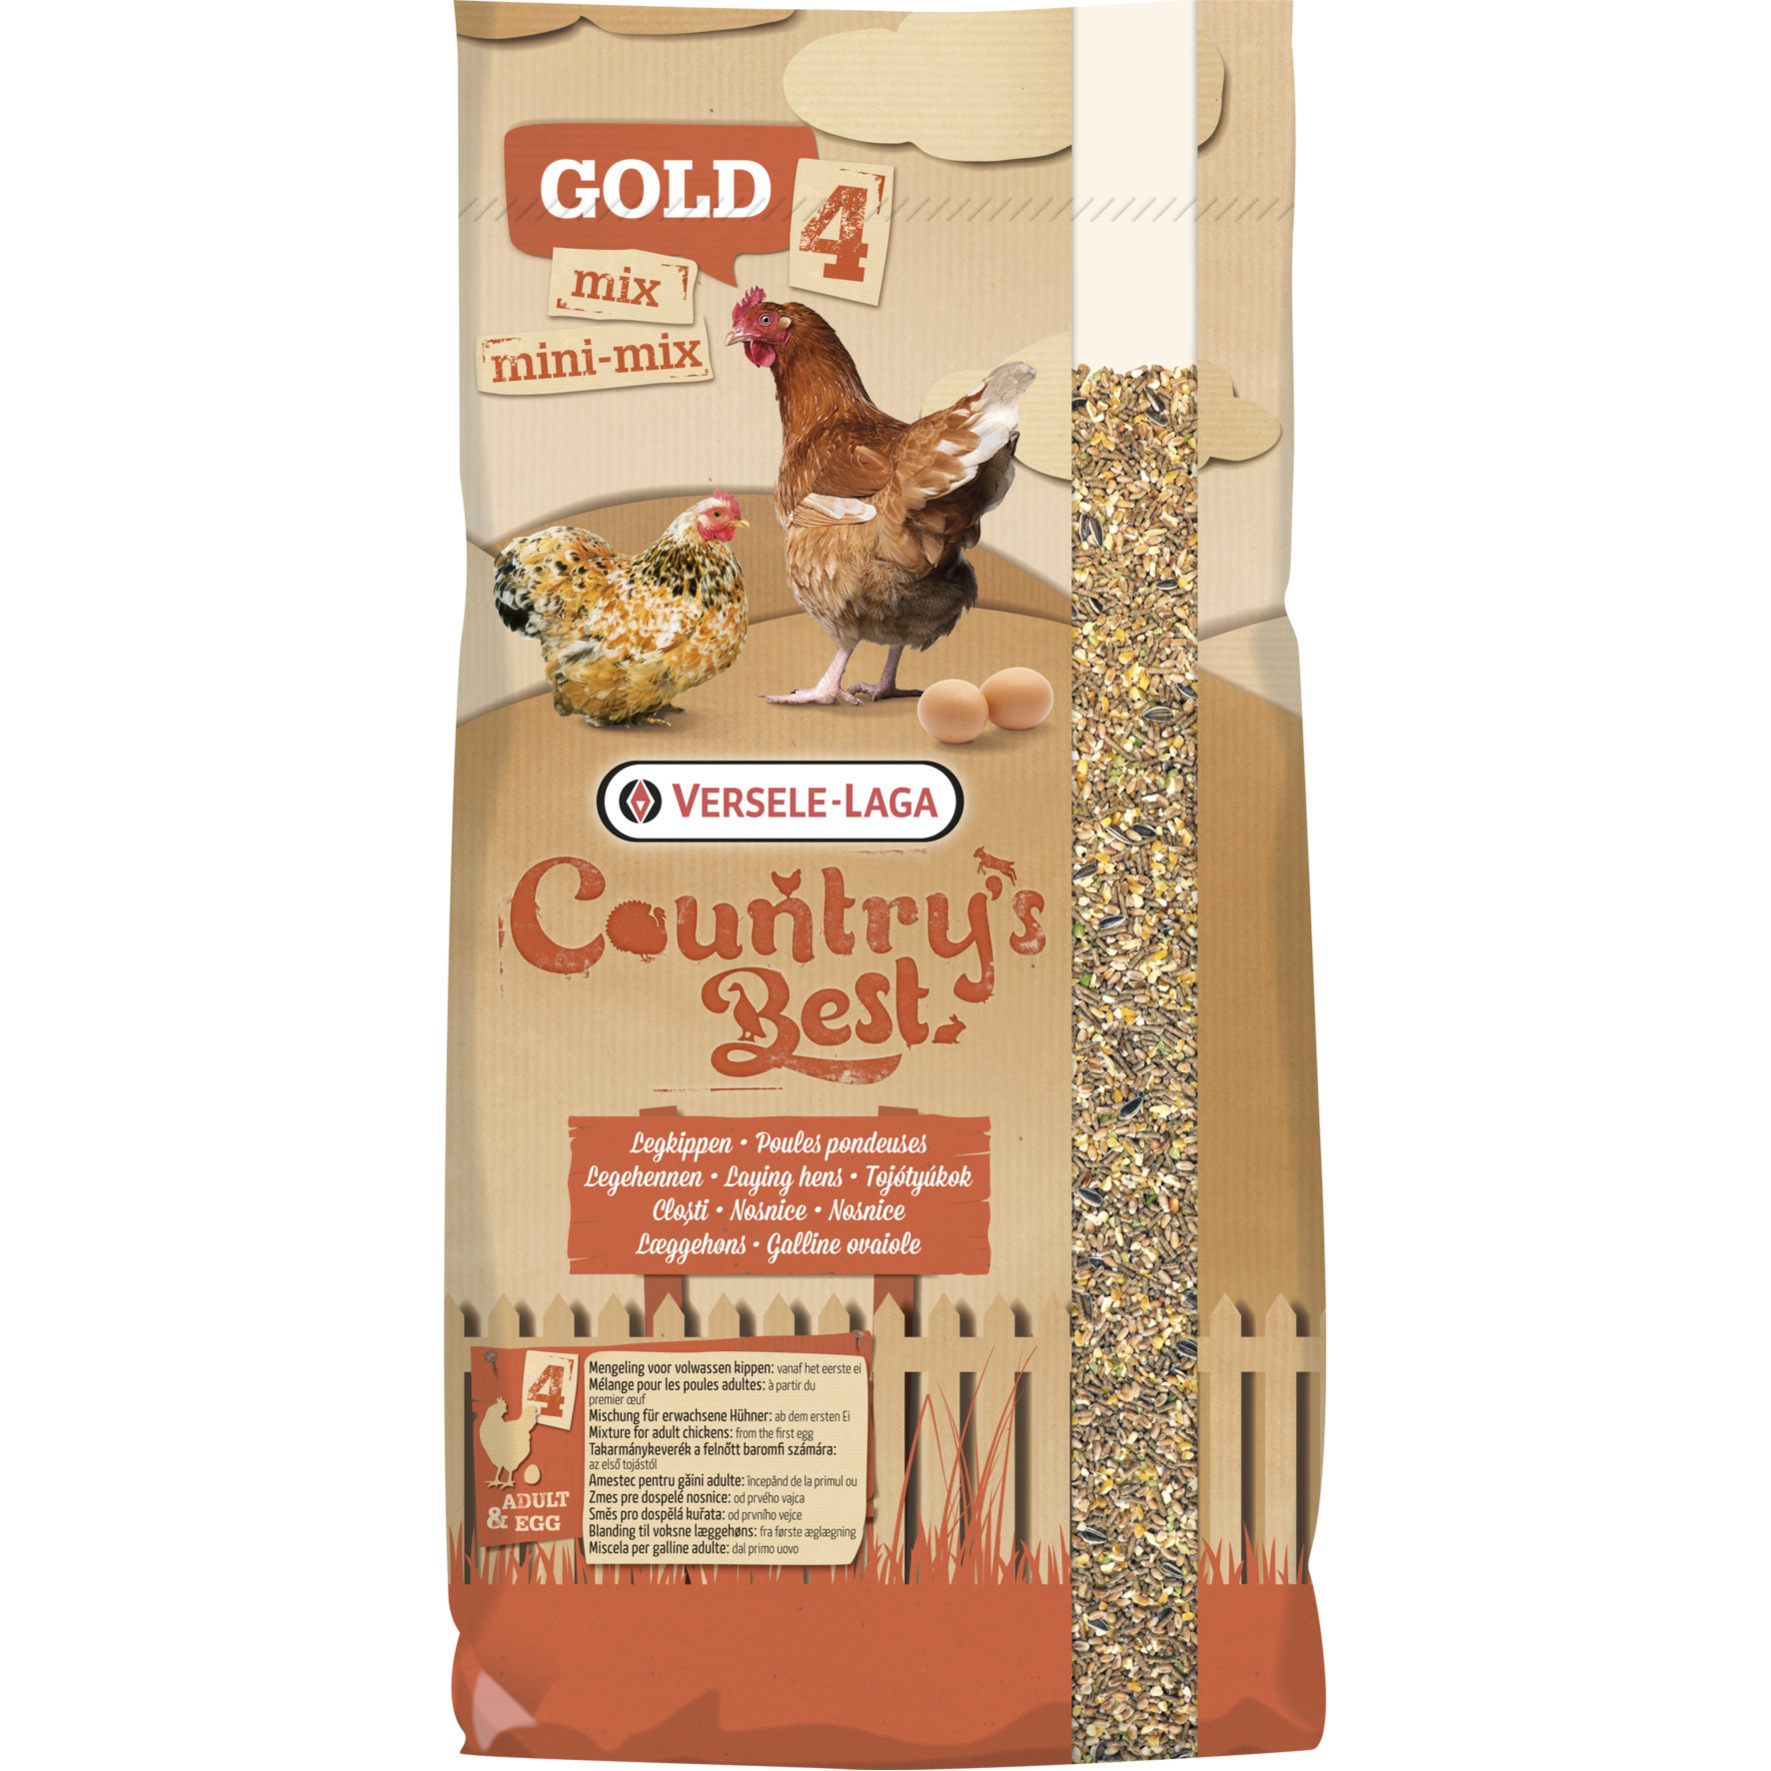 Versele-Laga Country's Best Gold 4, mix 20 kg